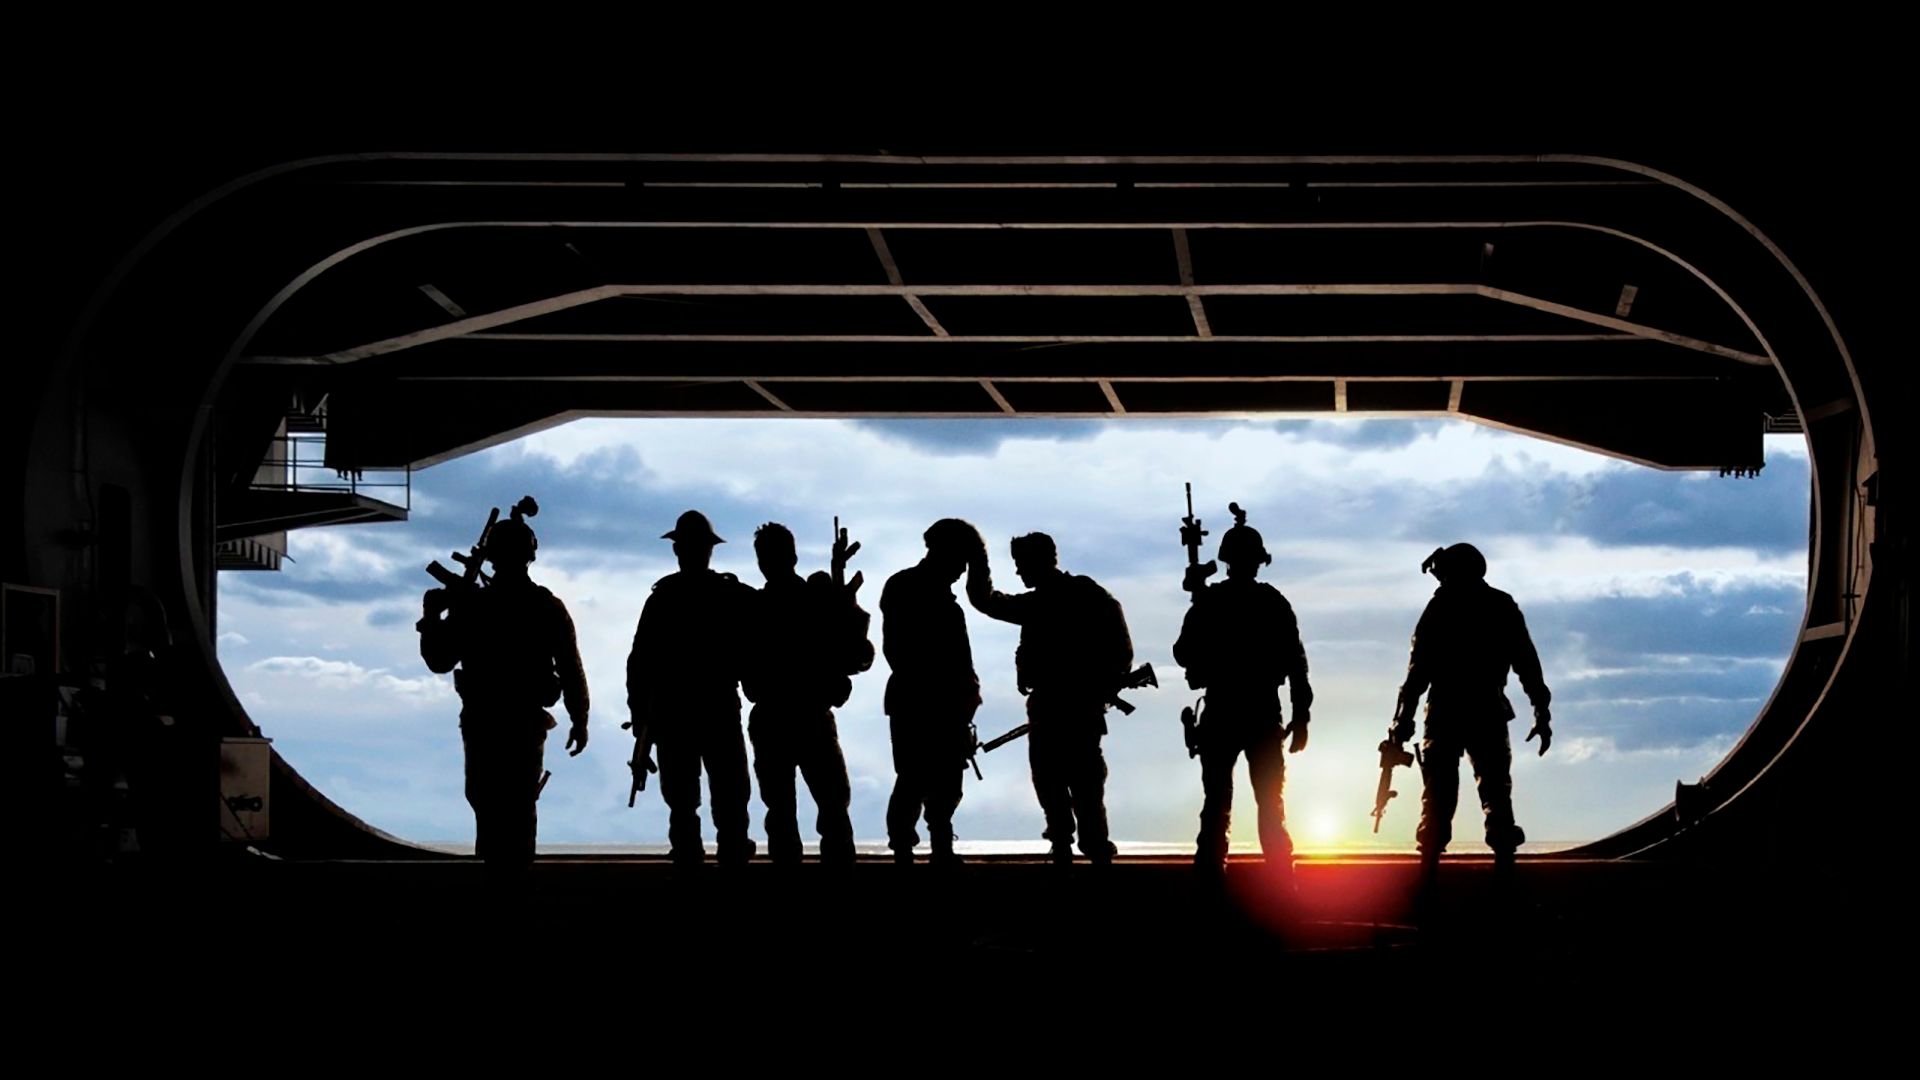 Act of Valor background